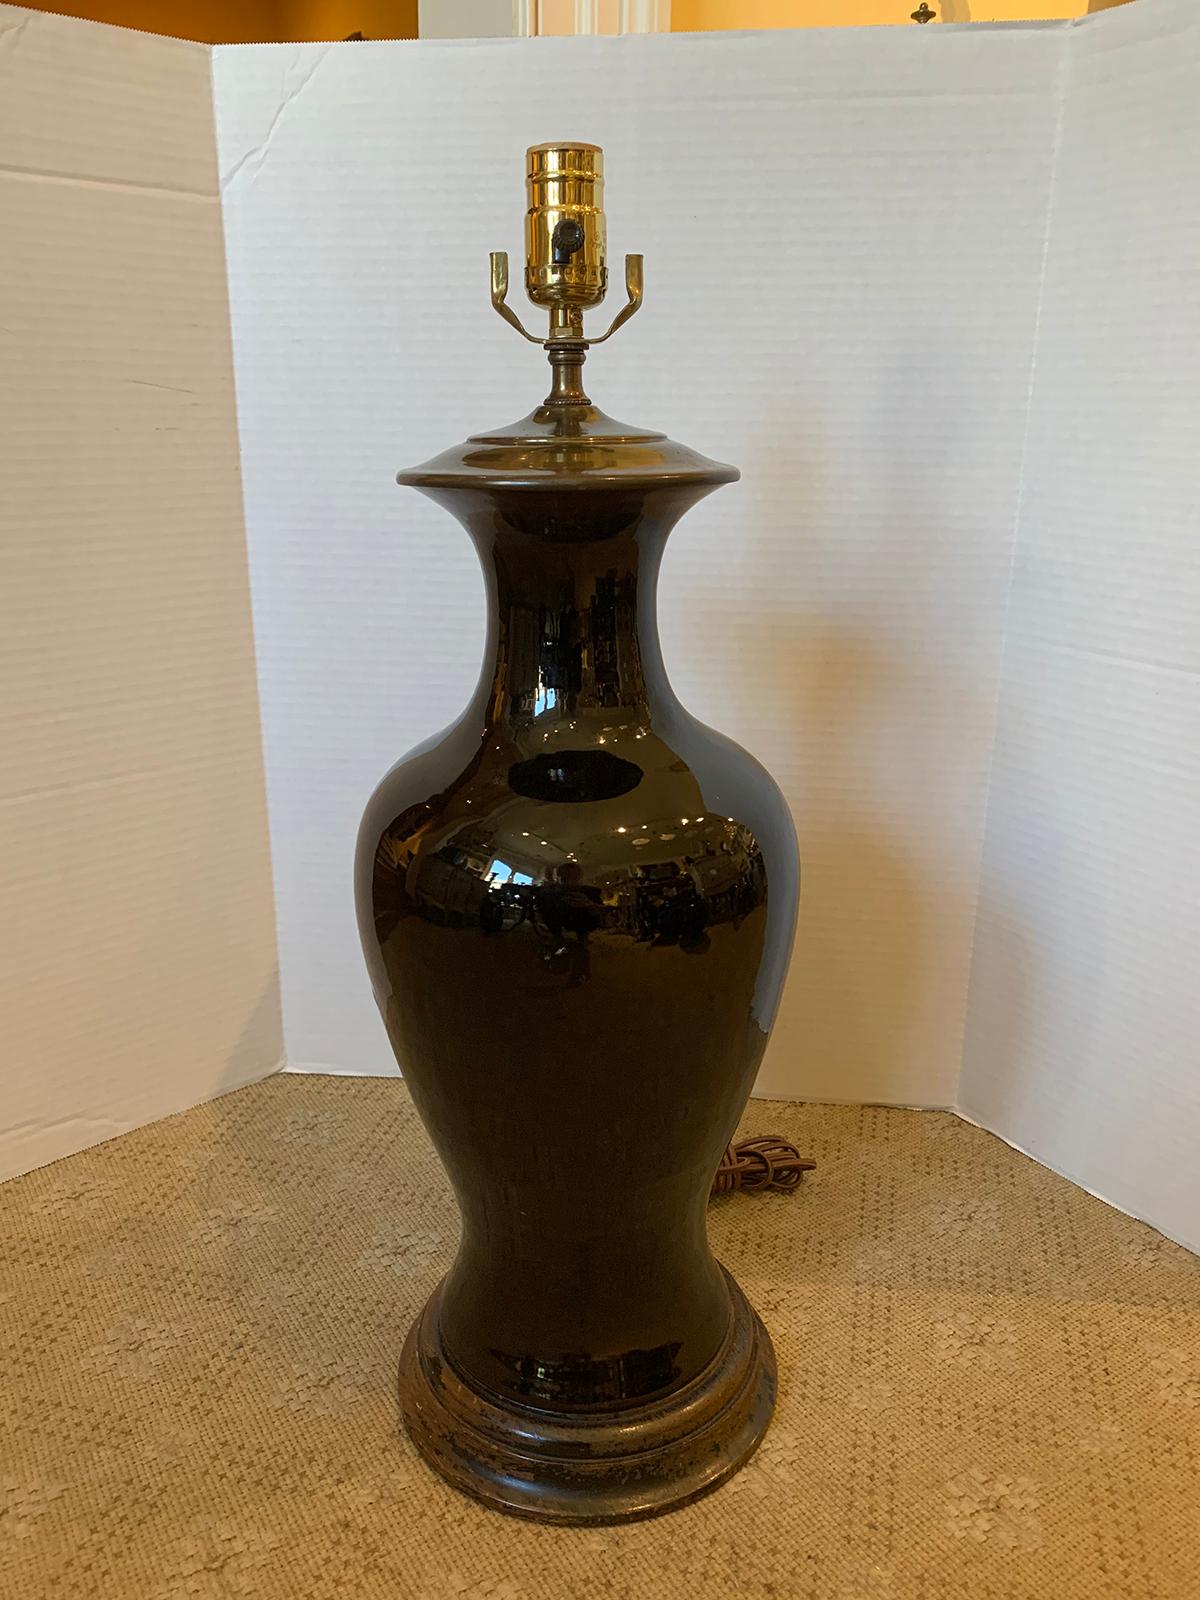 18th-19th century Chinese black mirror porcelain vase as lamp
New wiring.